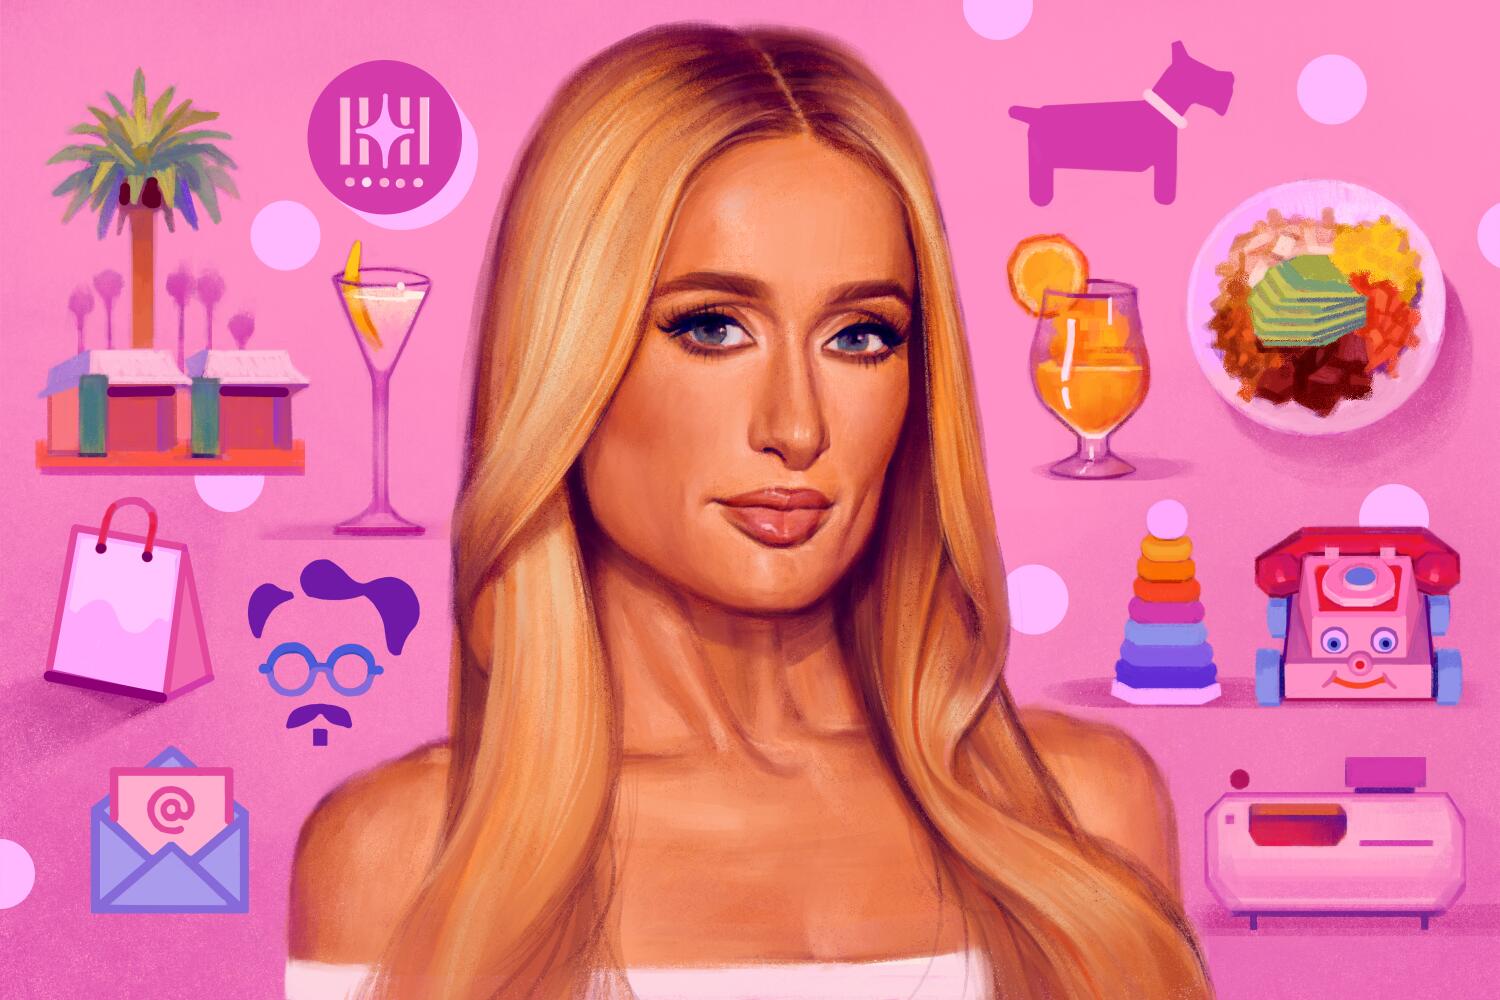 How to have the best Sunday in L.A., according to Paris Hilton